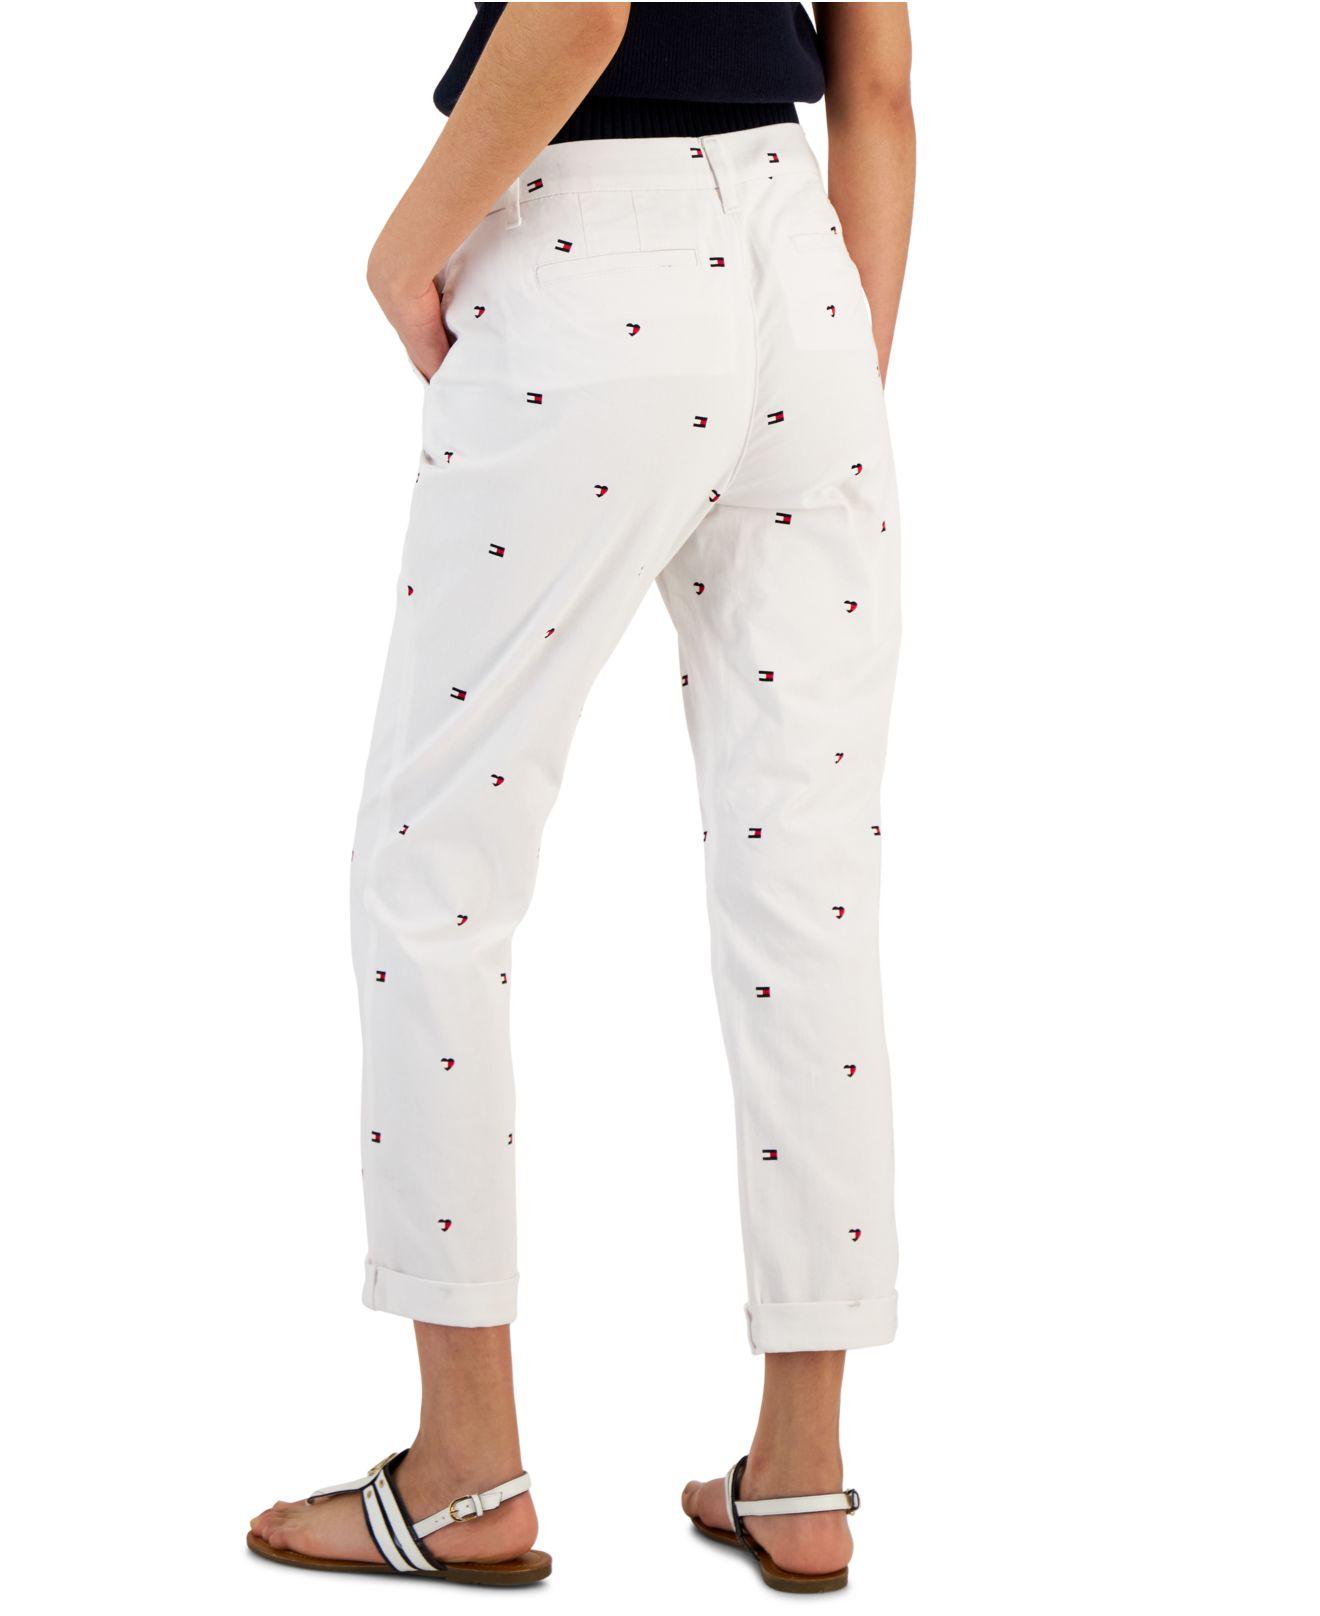 Tommy Hilfiger Hampton Heart Flag Chino Pants in White | Lyst